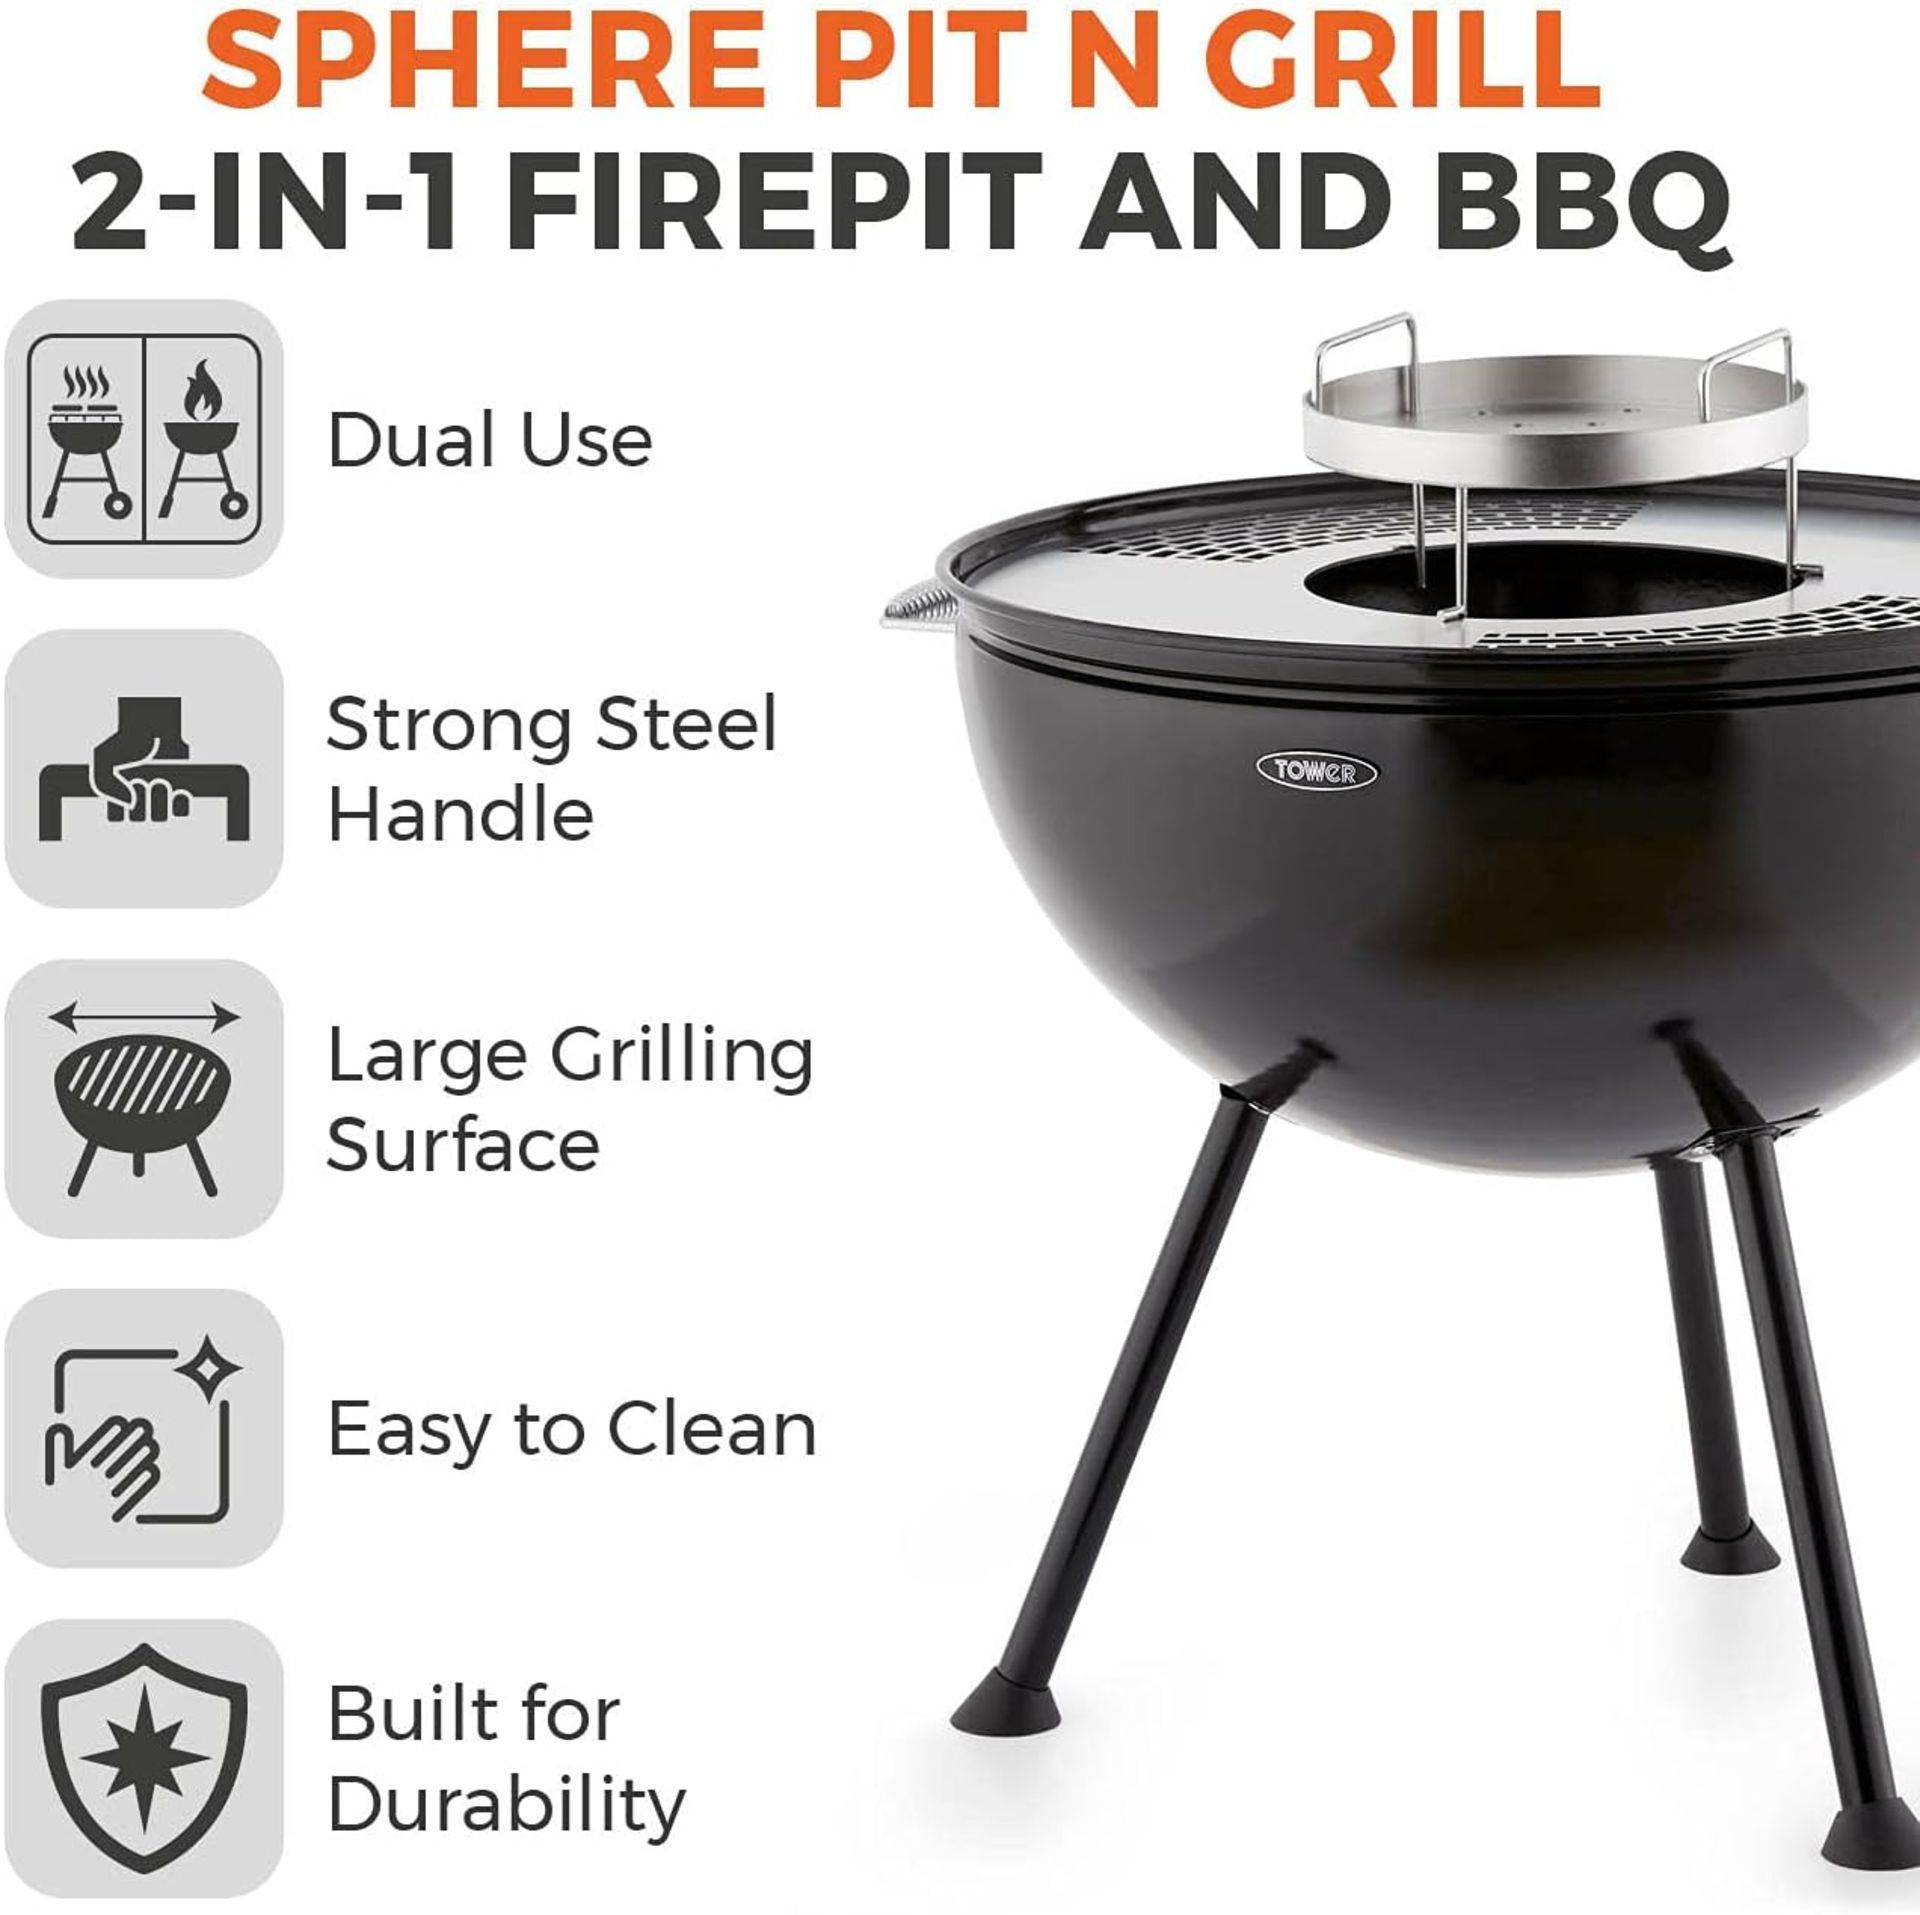 Brand New Tower Sphere Fire Pit and BBQ Grill, Black, DUAL USE â€“ This multi-functional pit n grill - Image 3 of 6